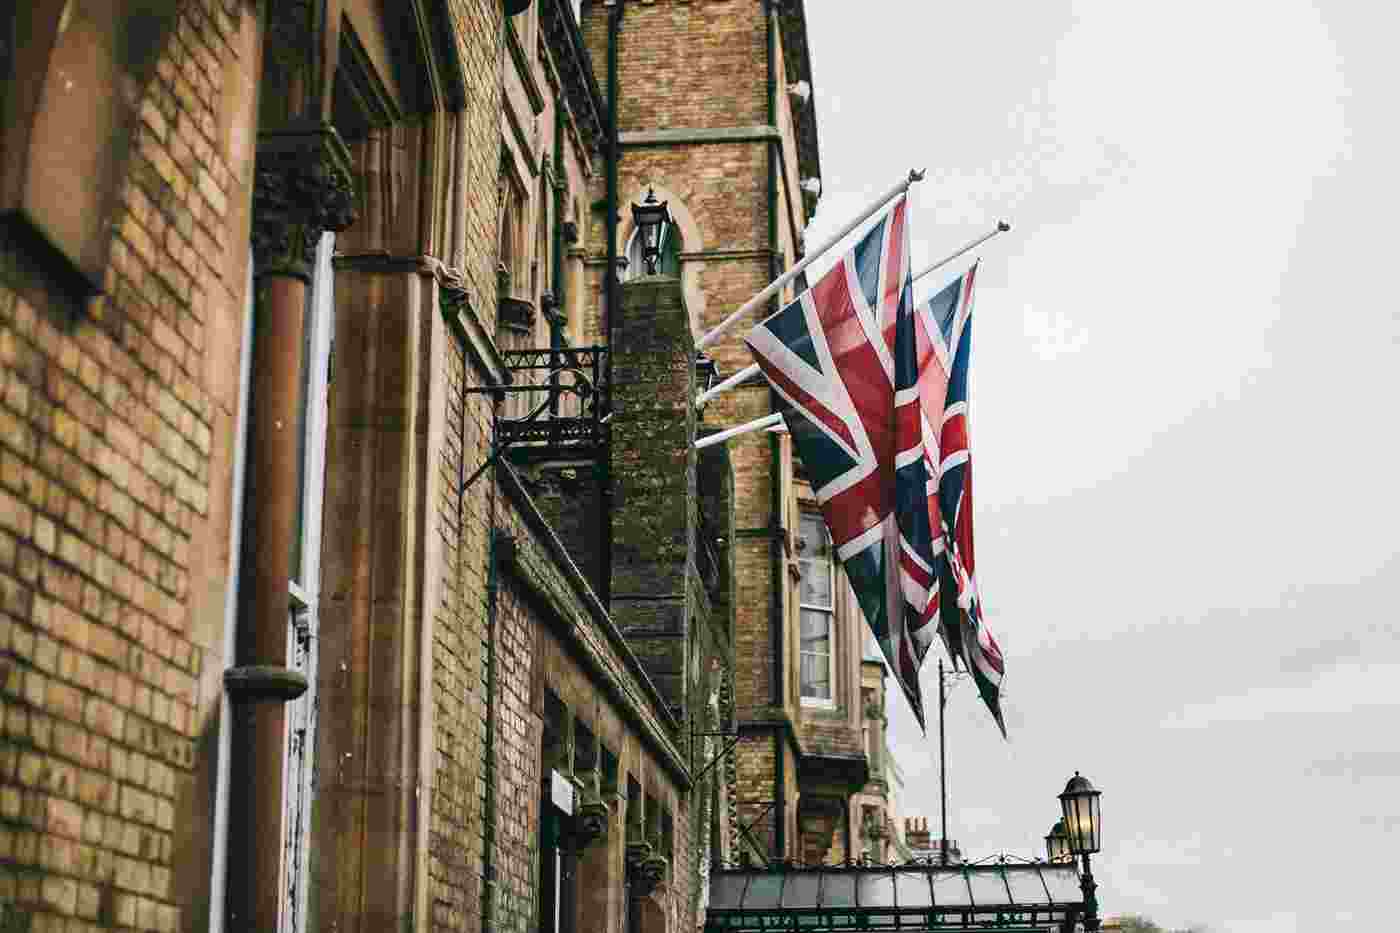 Union jack flag hanging on a building